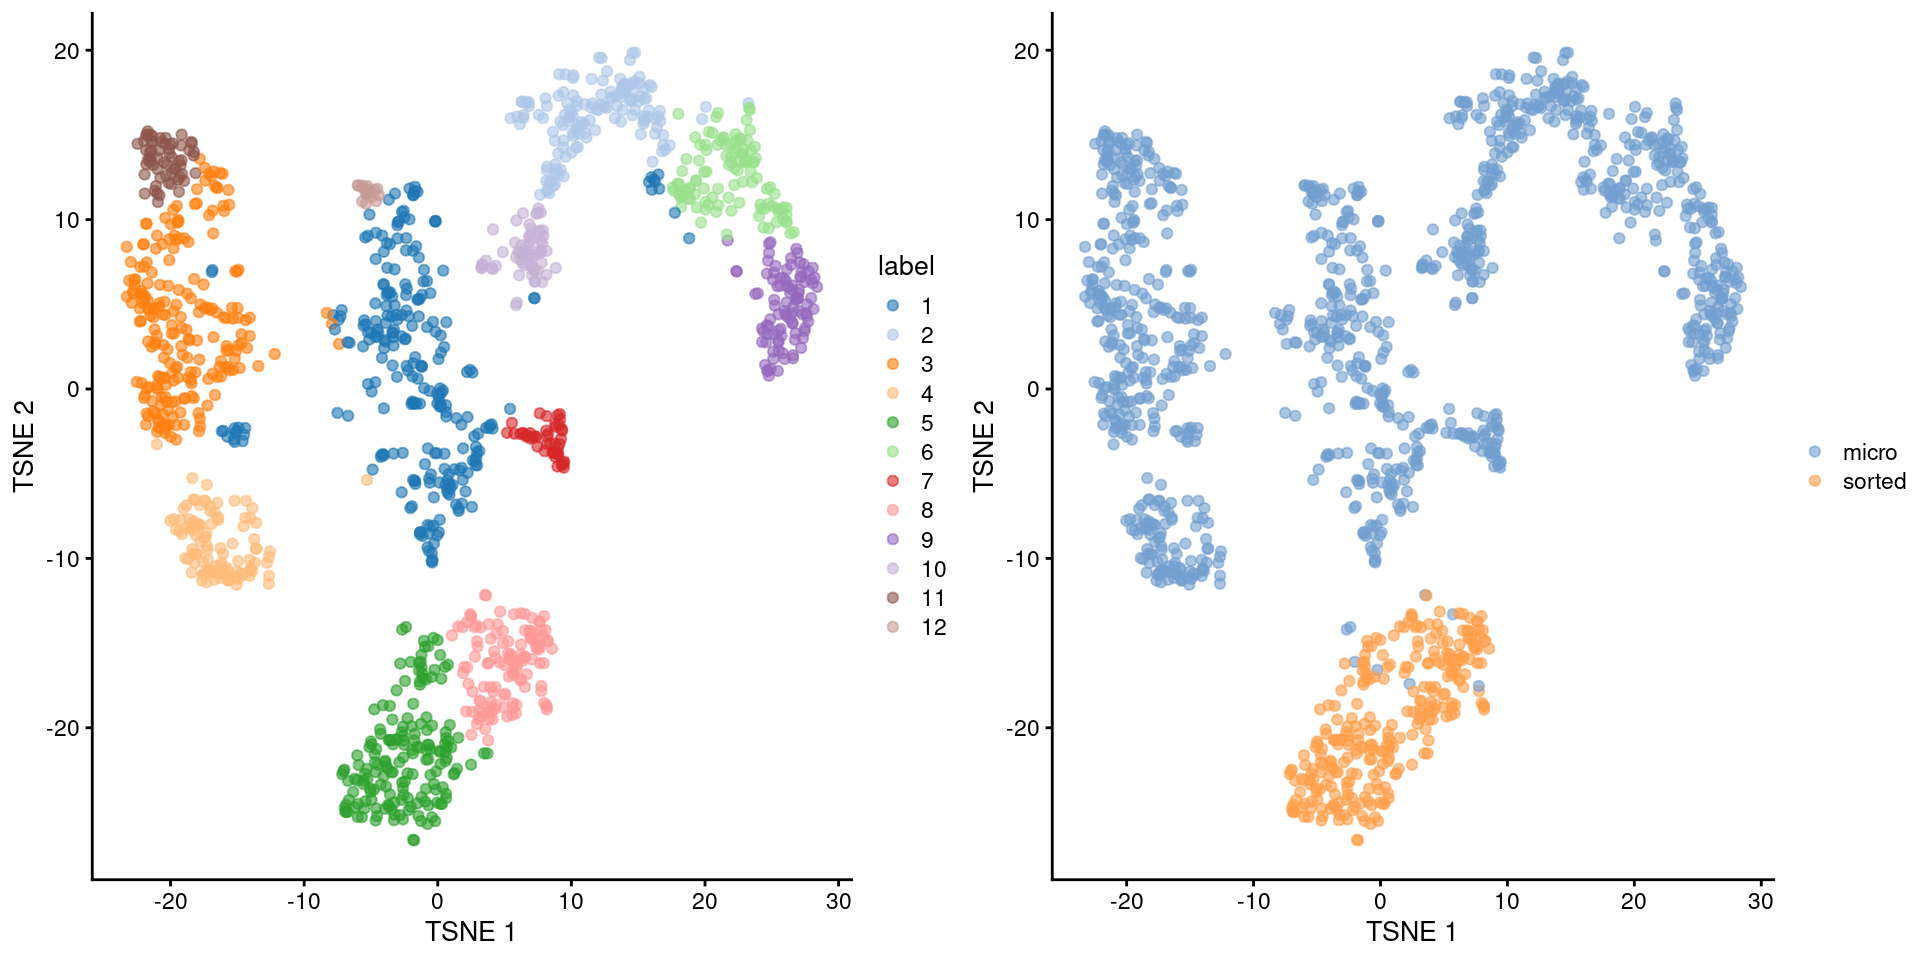 Obligatory $t$-SNE plot of the Grun HSC dataset, where each point represents a cell and is colored according to the assigned cluster (left) or extraction protocol (right).